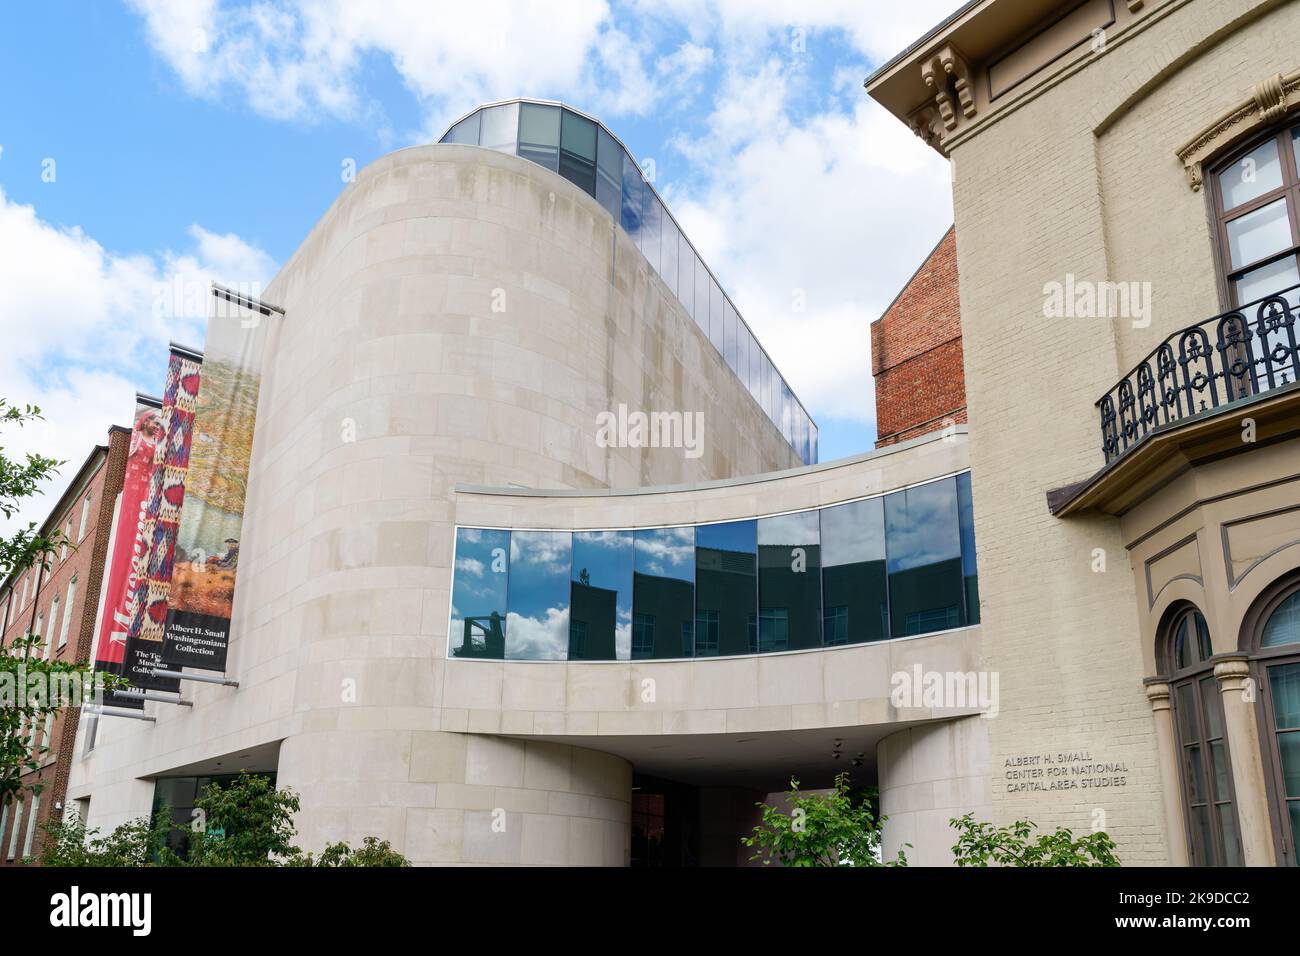 Washington, DC - Sept. 8, 2022: The Albert H. Small Center for National Capital Area Studies and the entrance to the Textile Museum Collection at Geor Stock Photo